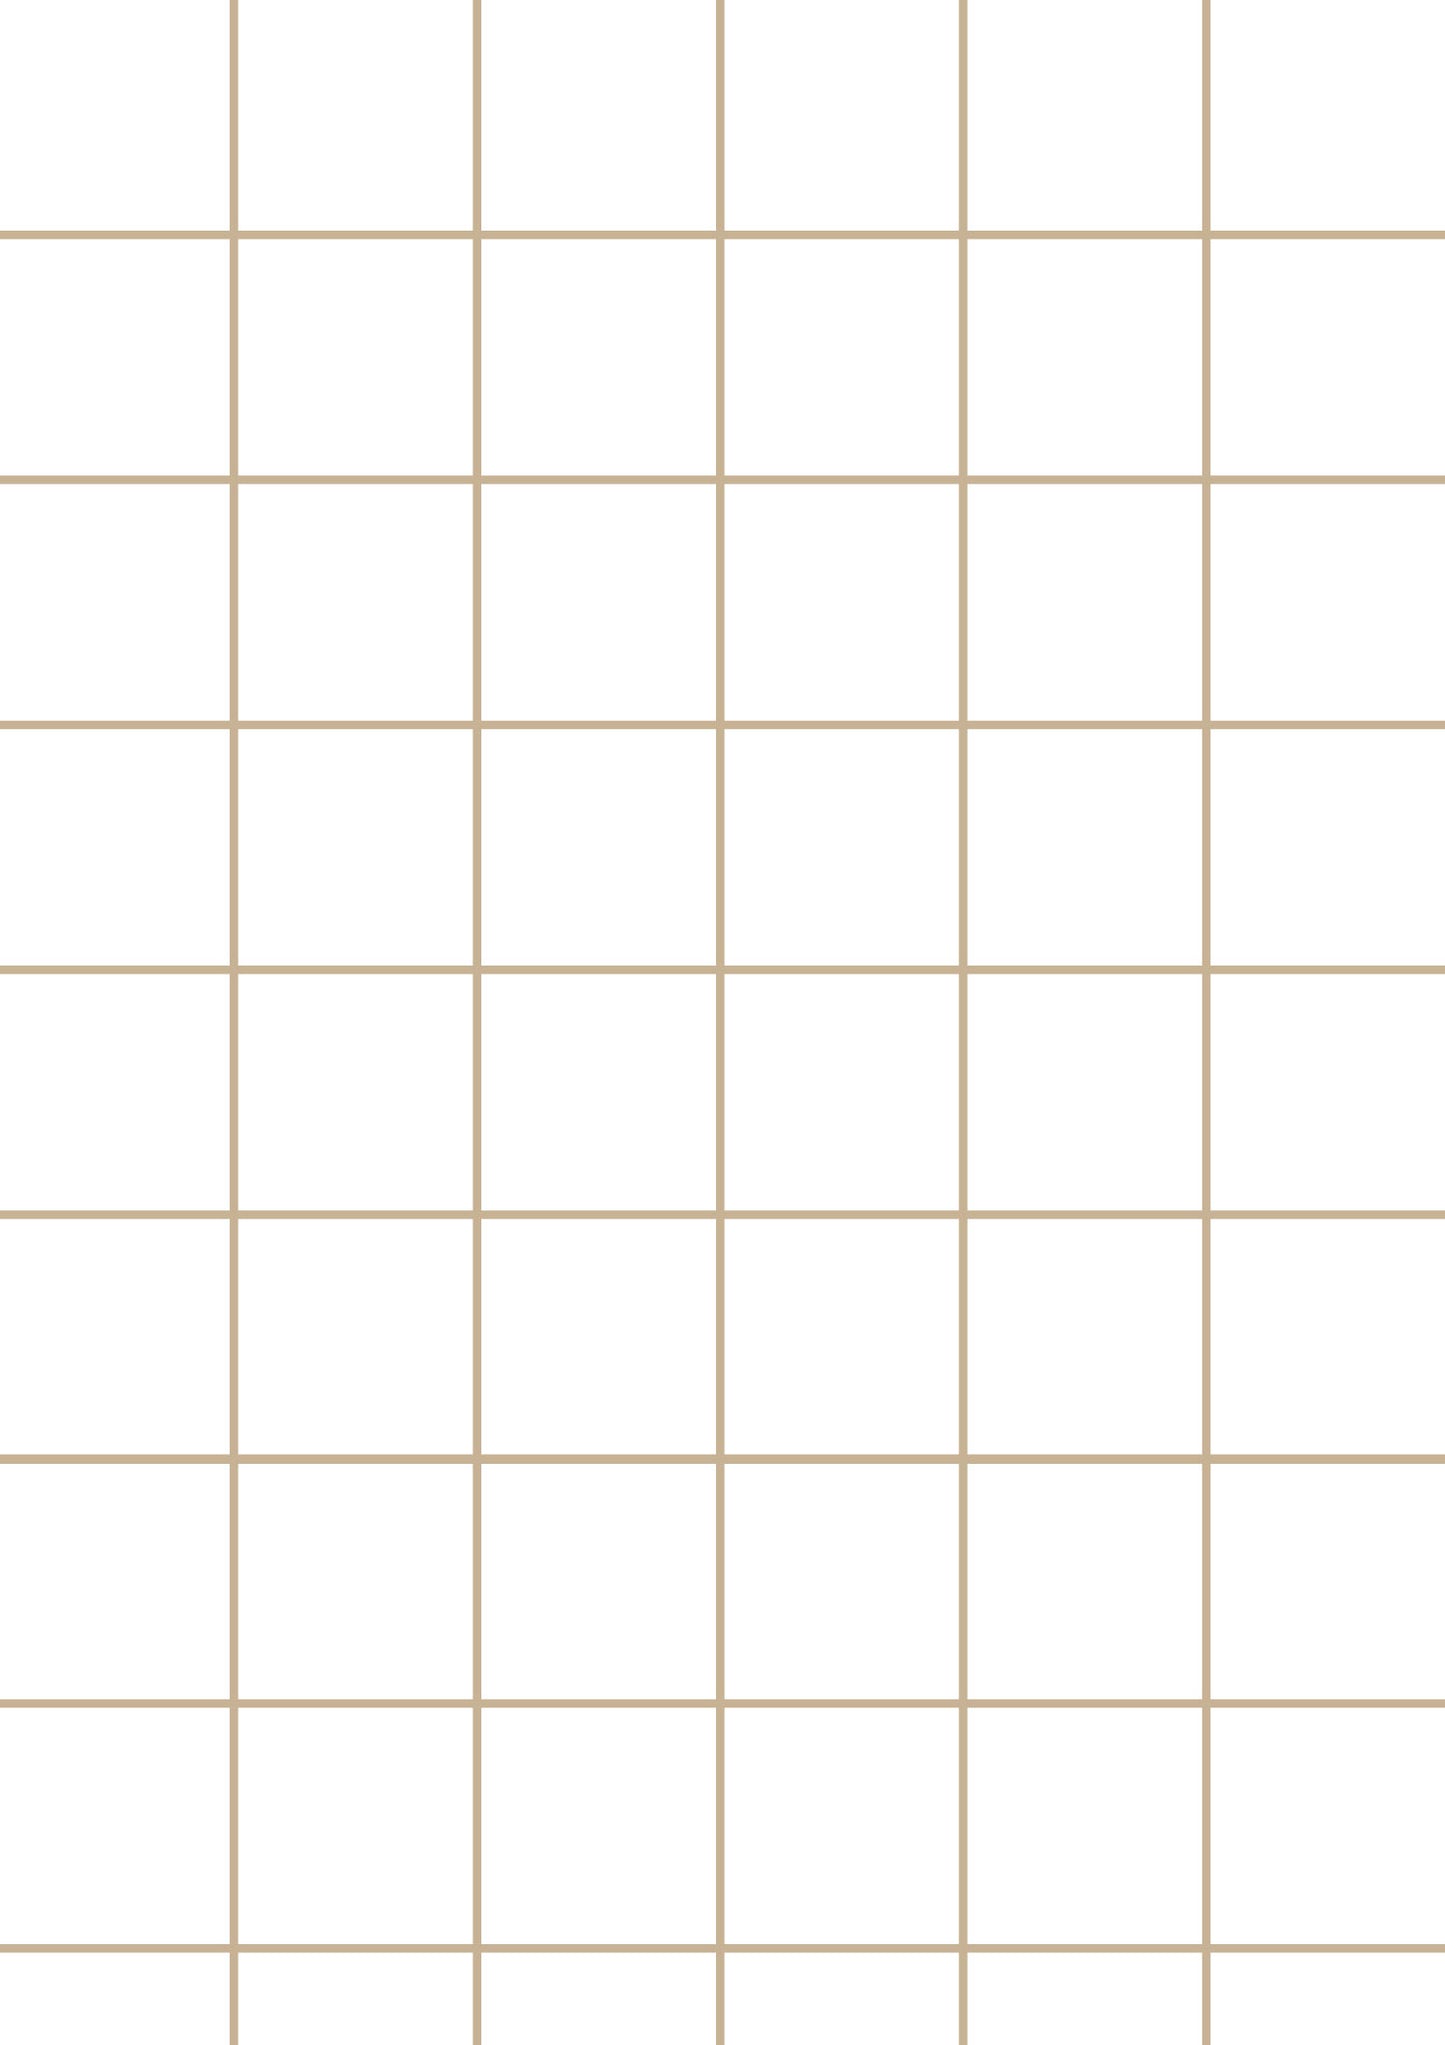 White A1 Photography Backdrop - Beige Grid